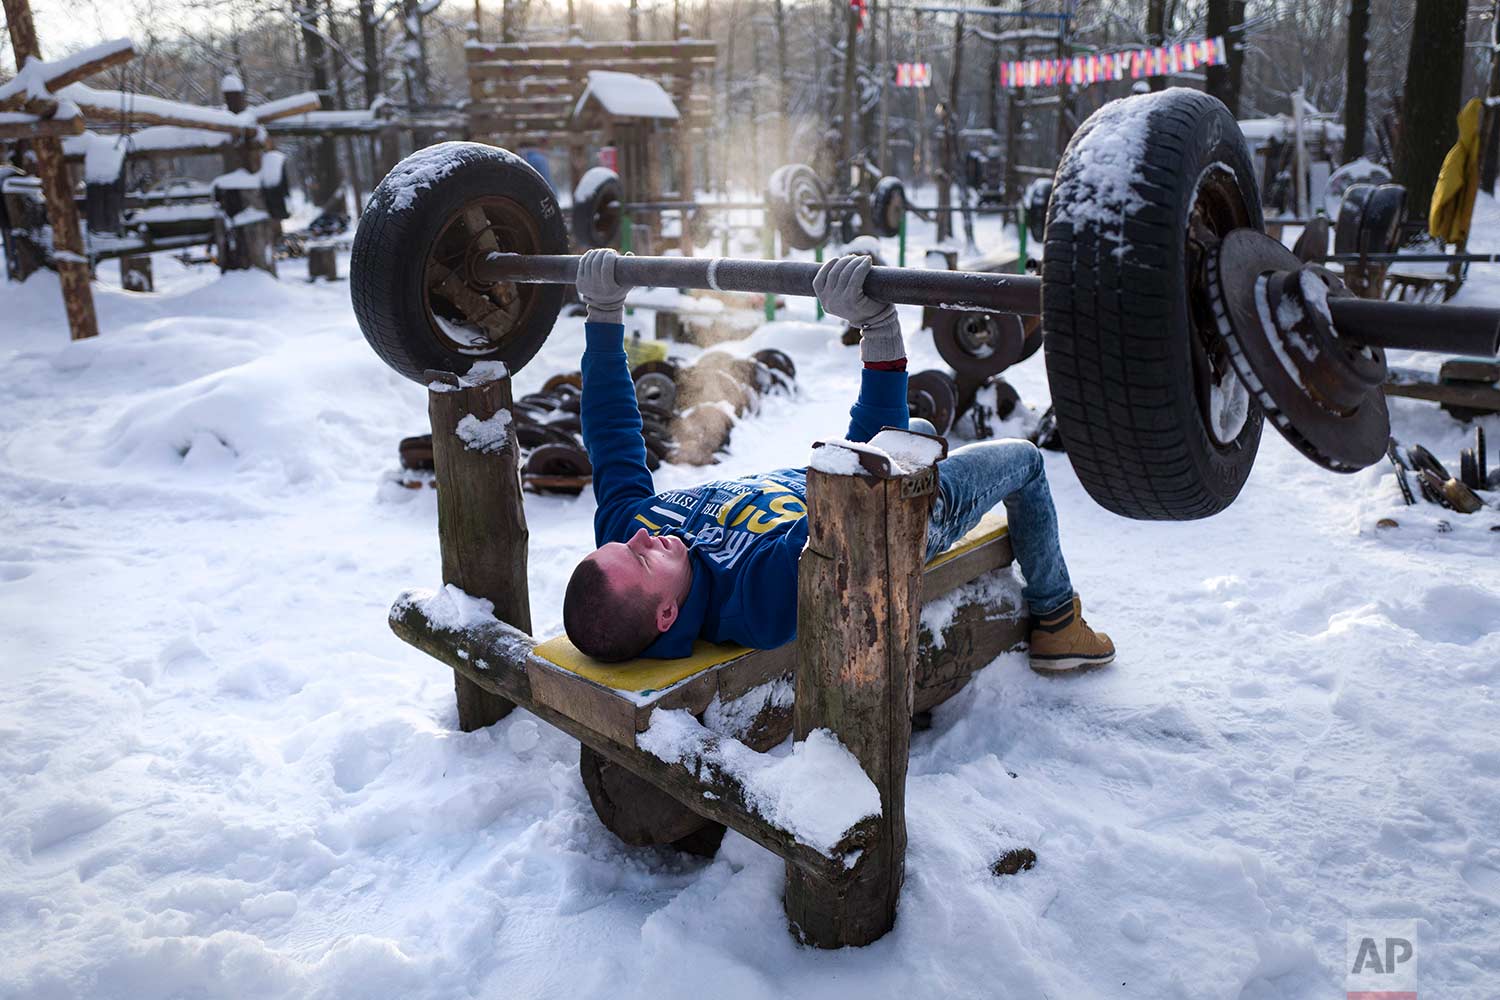  In this Thursday, Jan. 26, 2017 photo, a man trains in the outdoor gym in Timiryazevsky Park in Moscow, Russia. The morning temperature in Moscow is roughly minus -18 degrees Celsius (-0.4 Fahrenheit). (AP Photo/Alexander Zemlianichenko) 